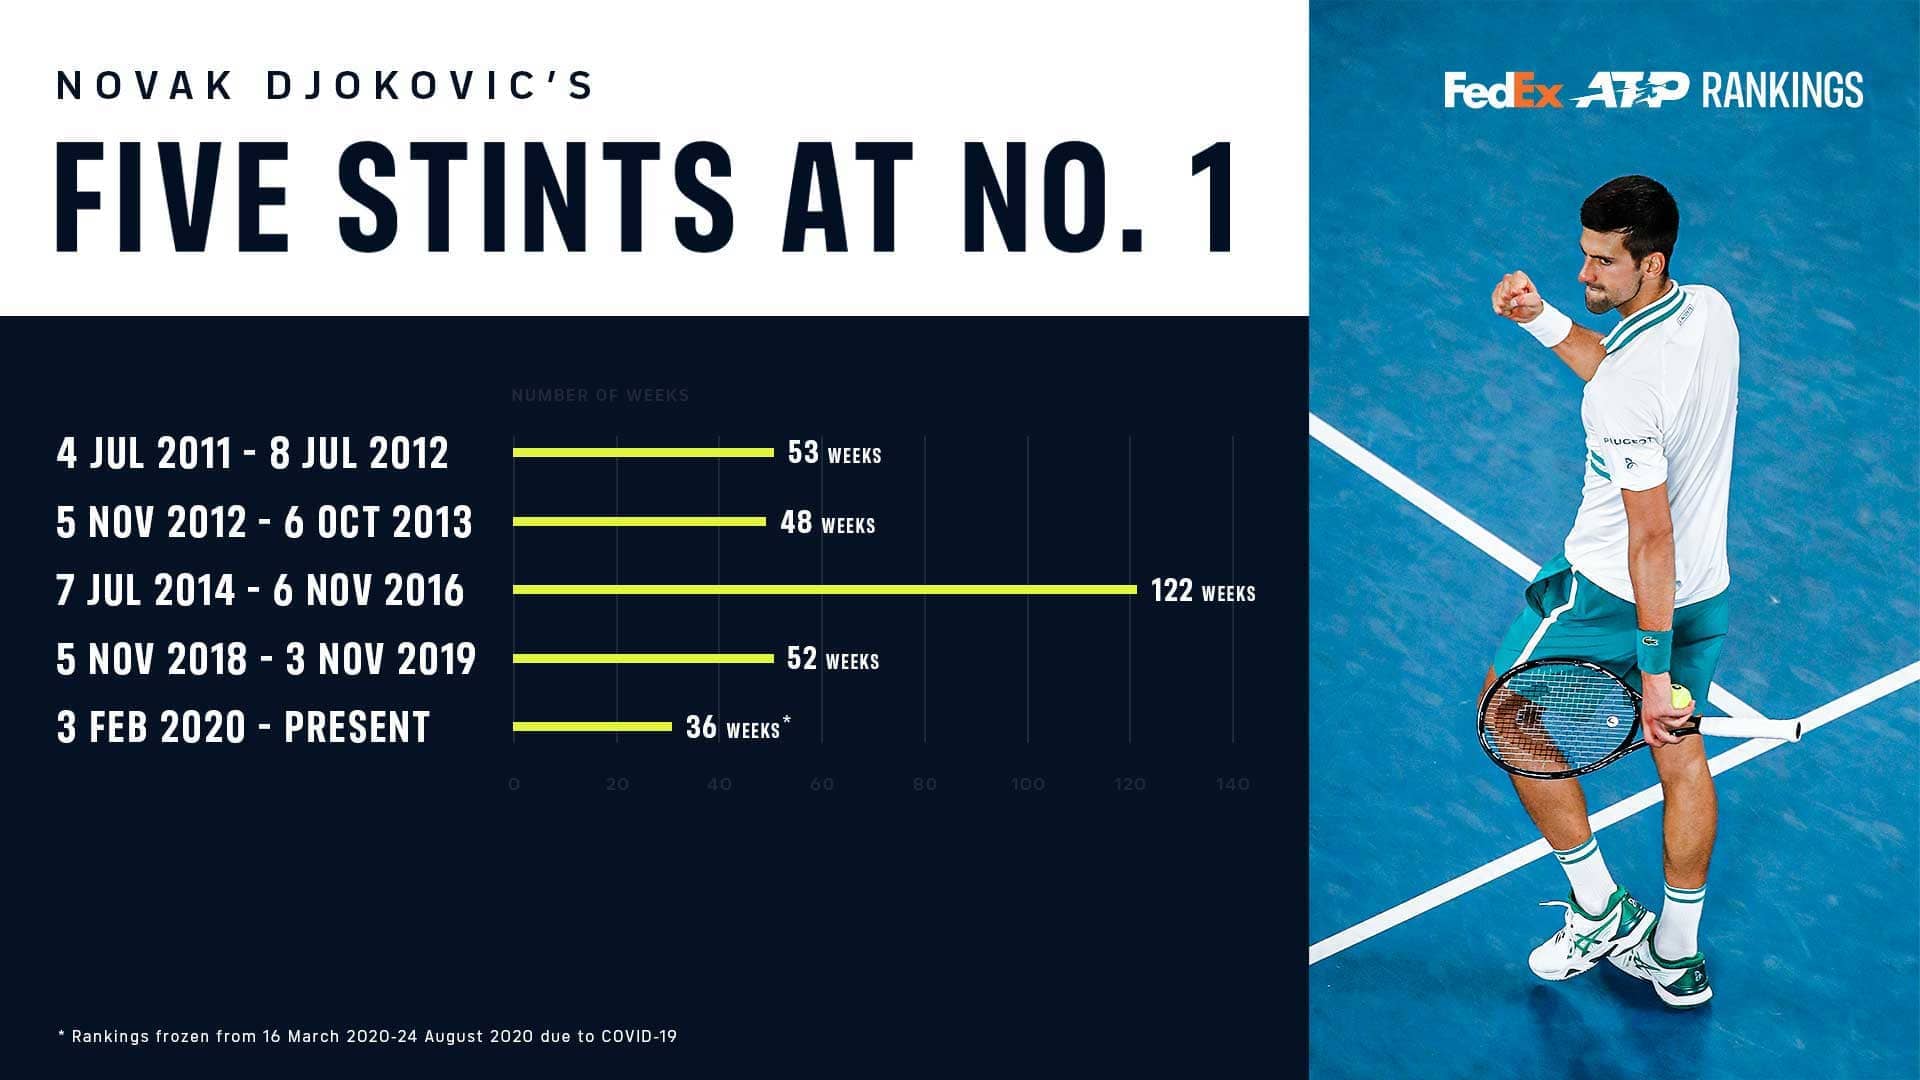 Djokovic's five stints at No. 1 in the FedEx ATP Rankings